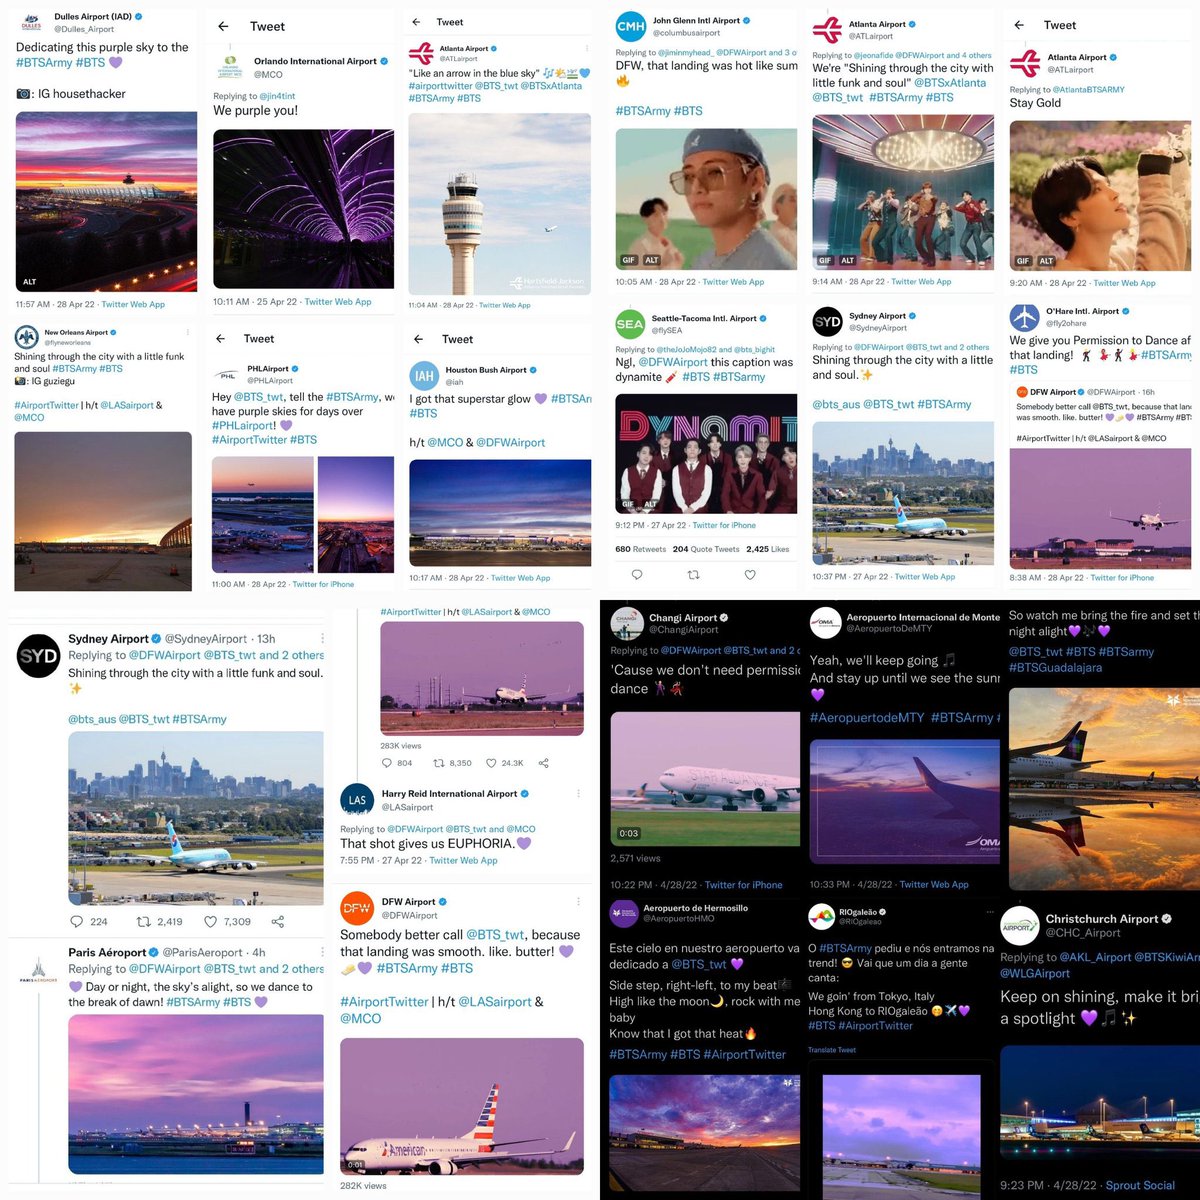 #AirportTwitter discovering #BTS